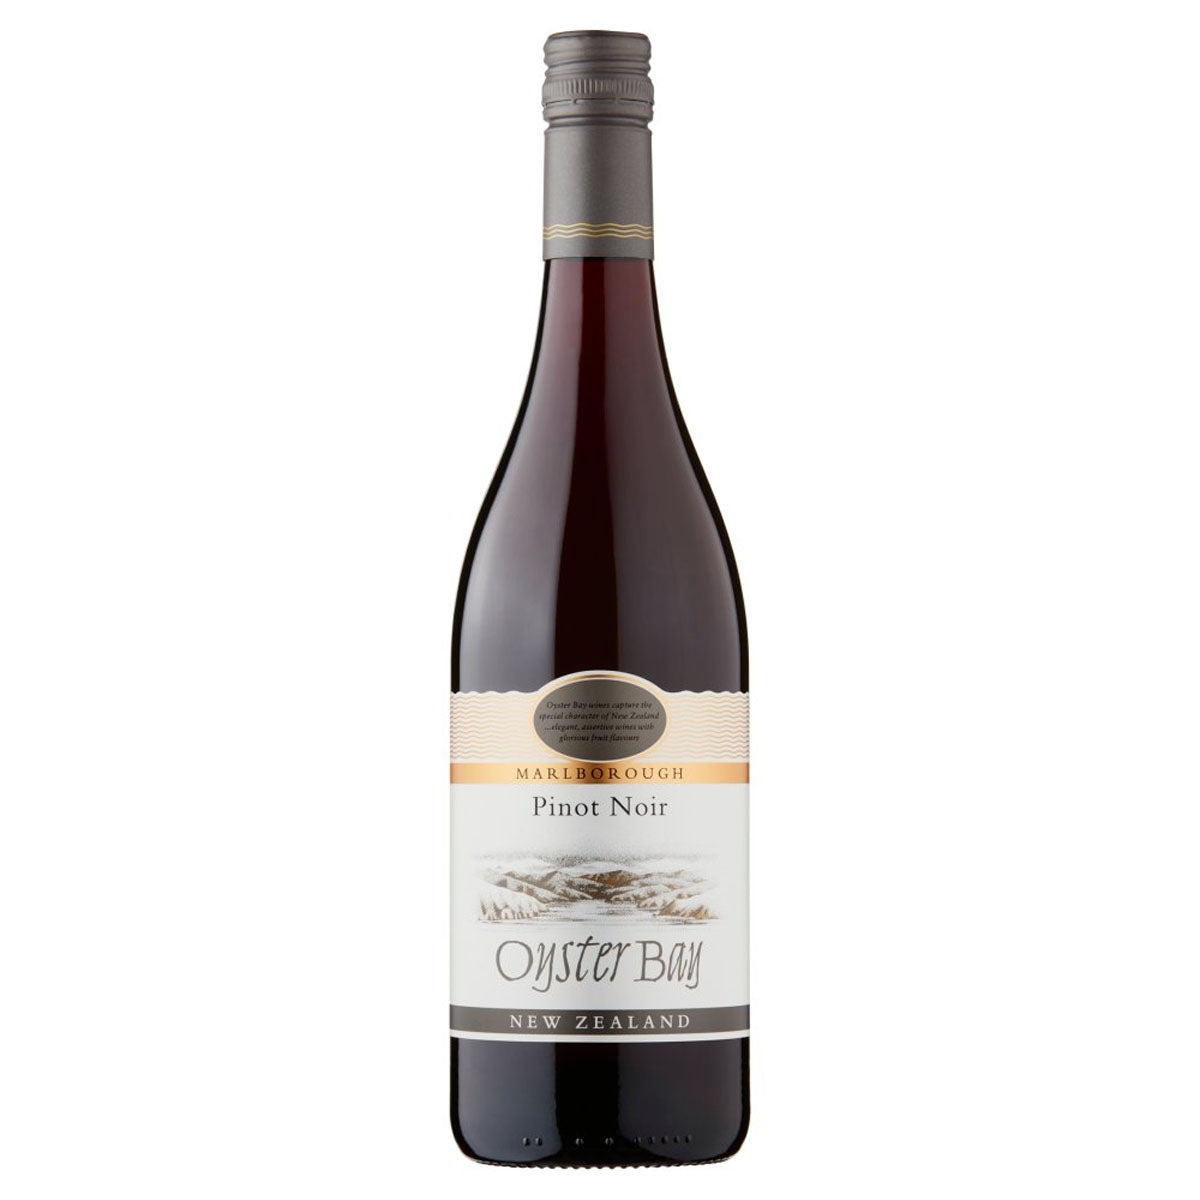 An Oyster Bay - Pinot Noir (13.5% ABV) - 750ml on a white background.